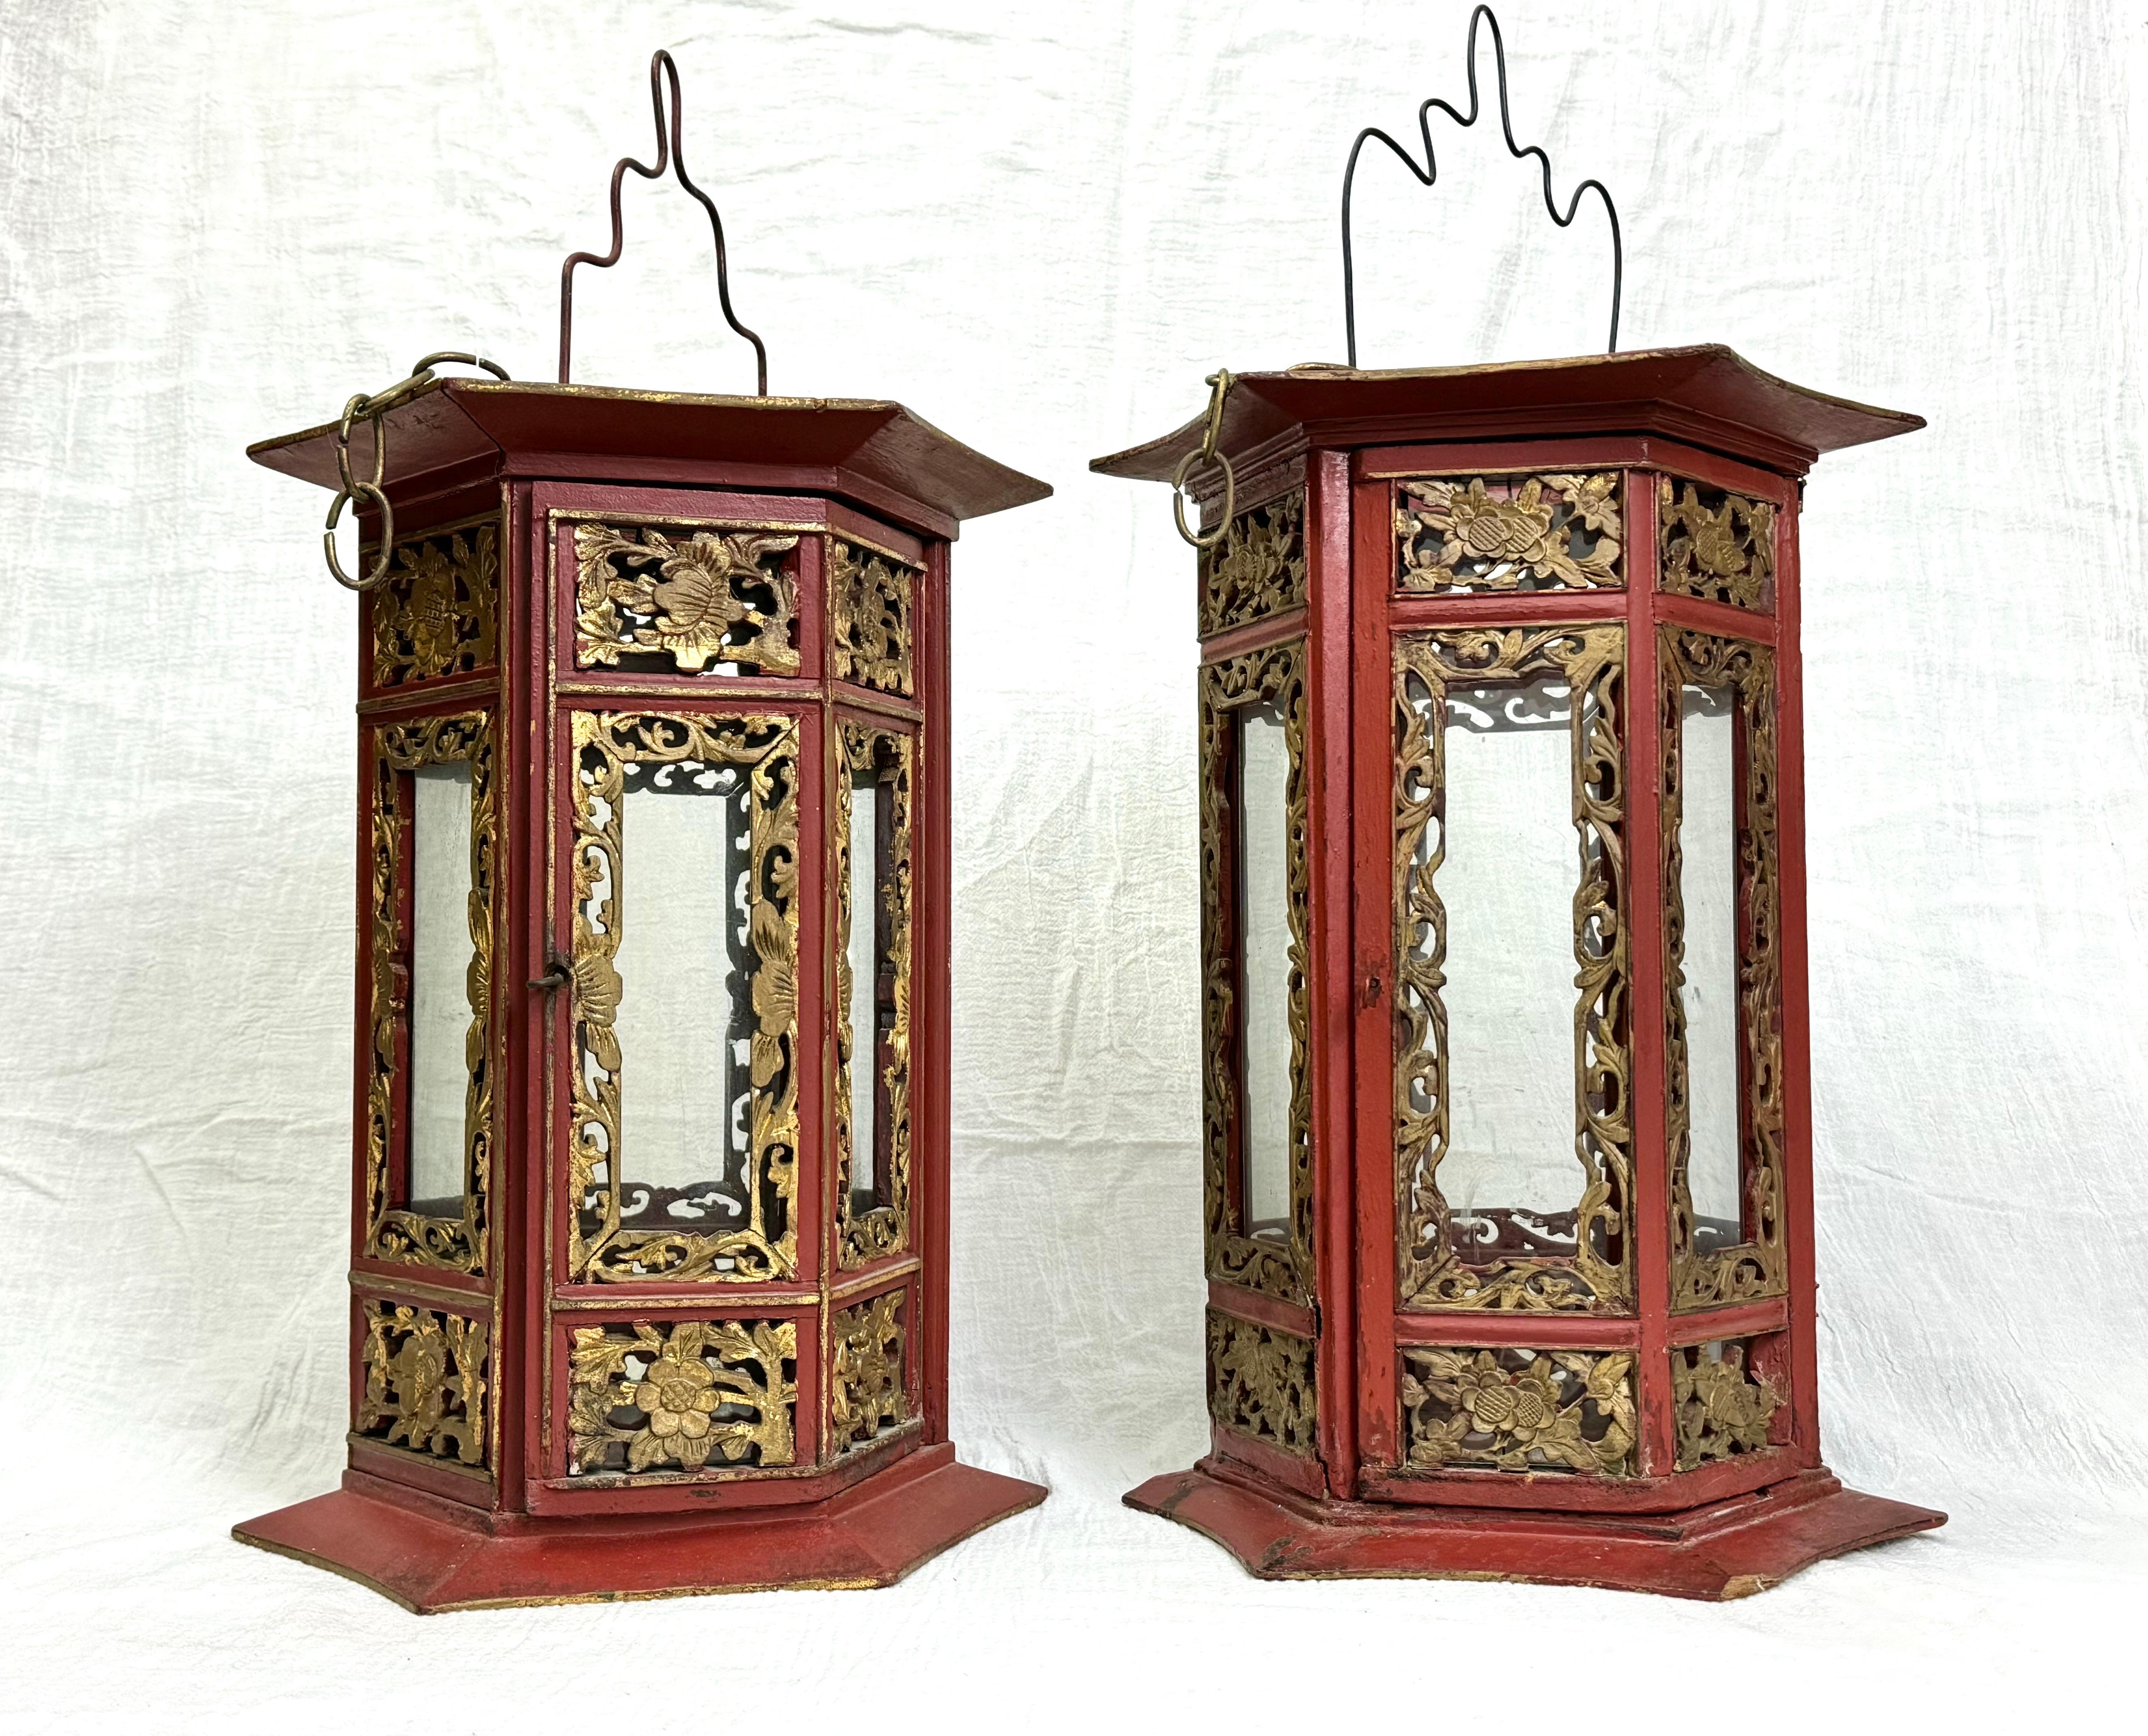 Pair of Asian Hand Carved Wooden Lanterns. Nice decorative pair in a rich cinnabar color. This pair is not identical but very similar. Heavily carved gilt wood with amazing detail. Hinged glass doors open to insert a large candle. Iron handles to